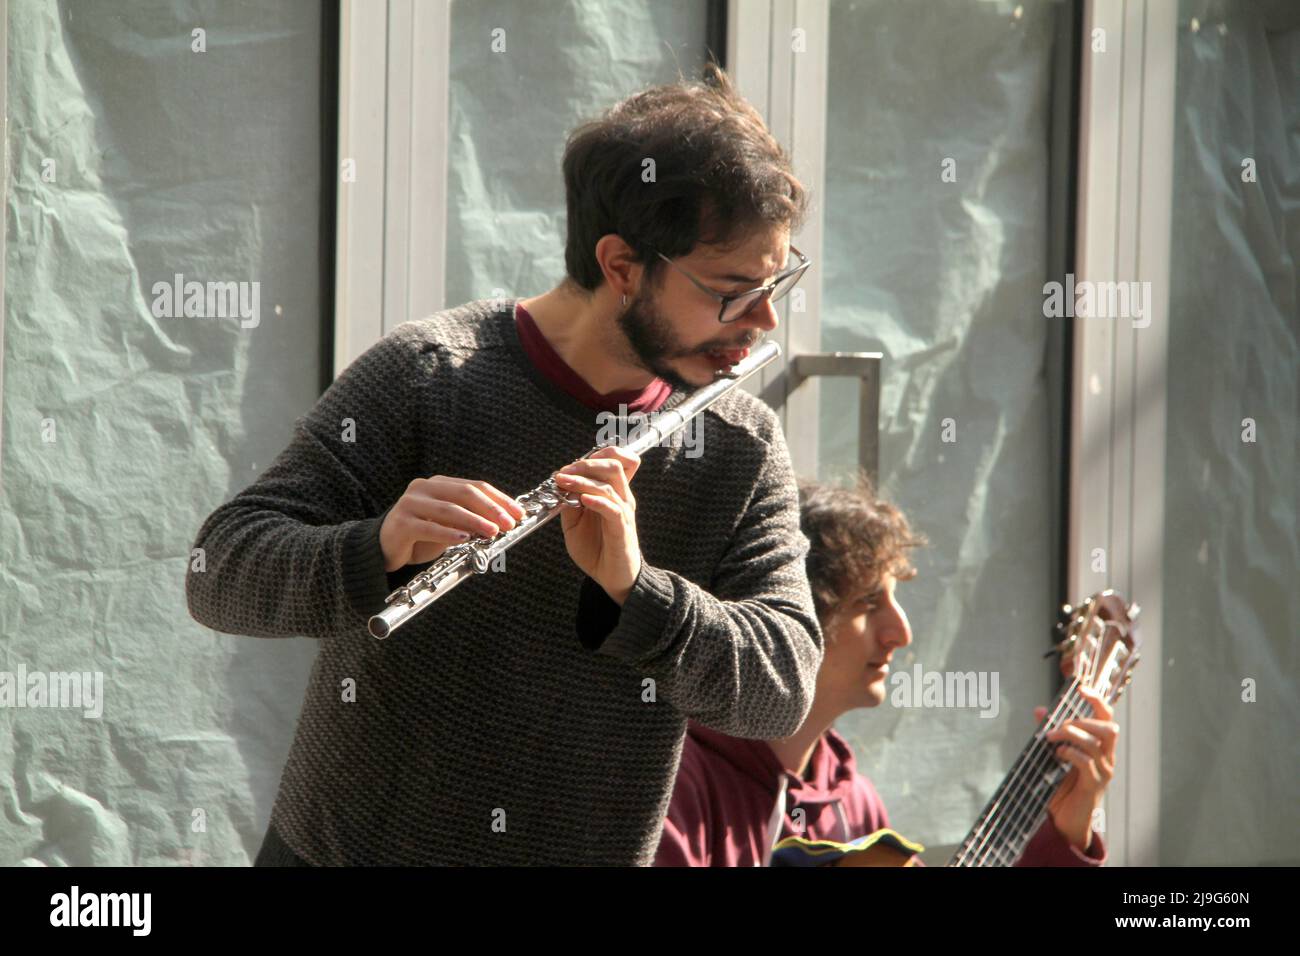 Young musicians on a street in Italy Stock Photo